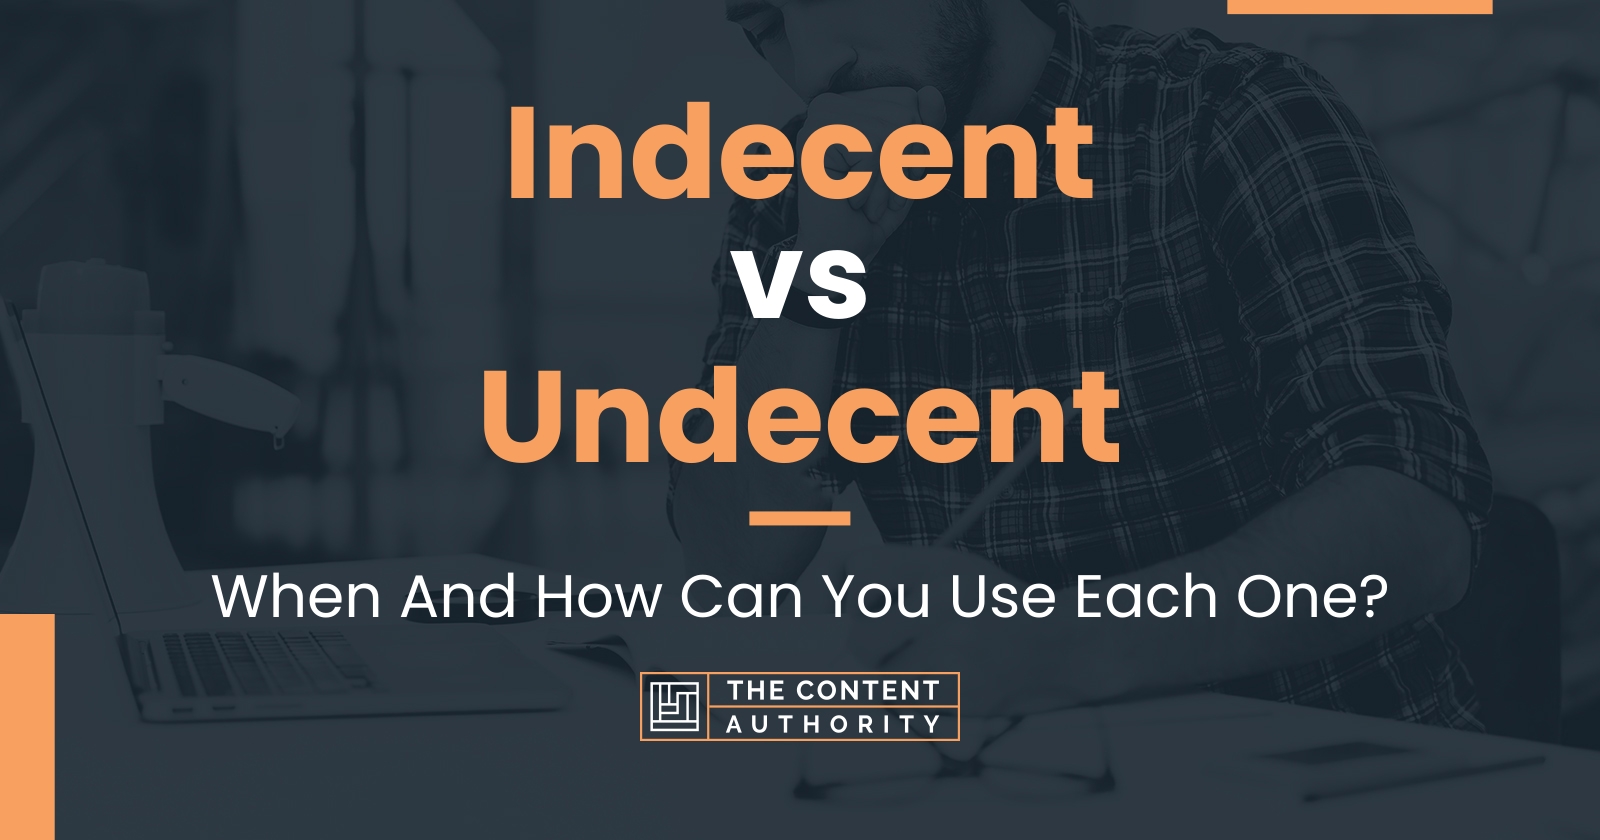 Indecent vs Undecent: When And How Can You Use Each One?